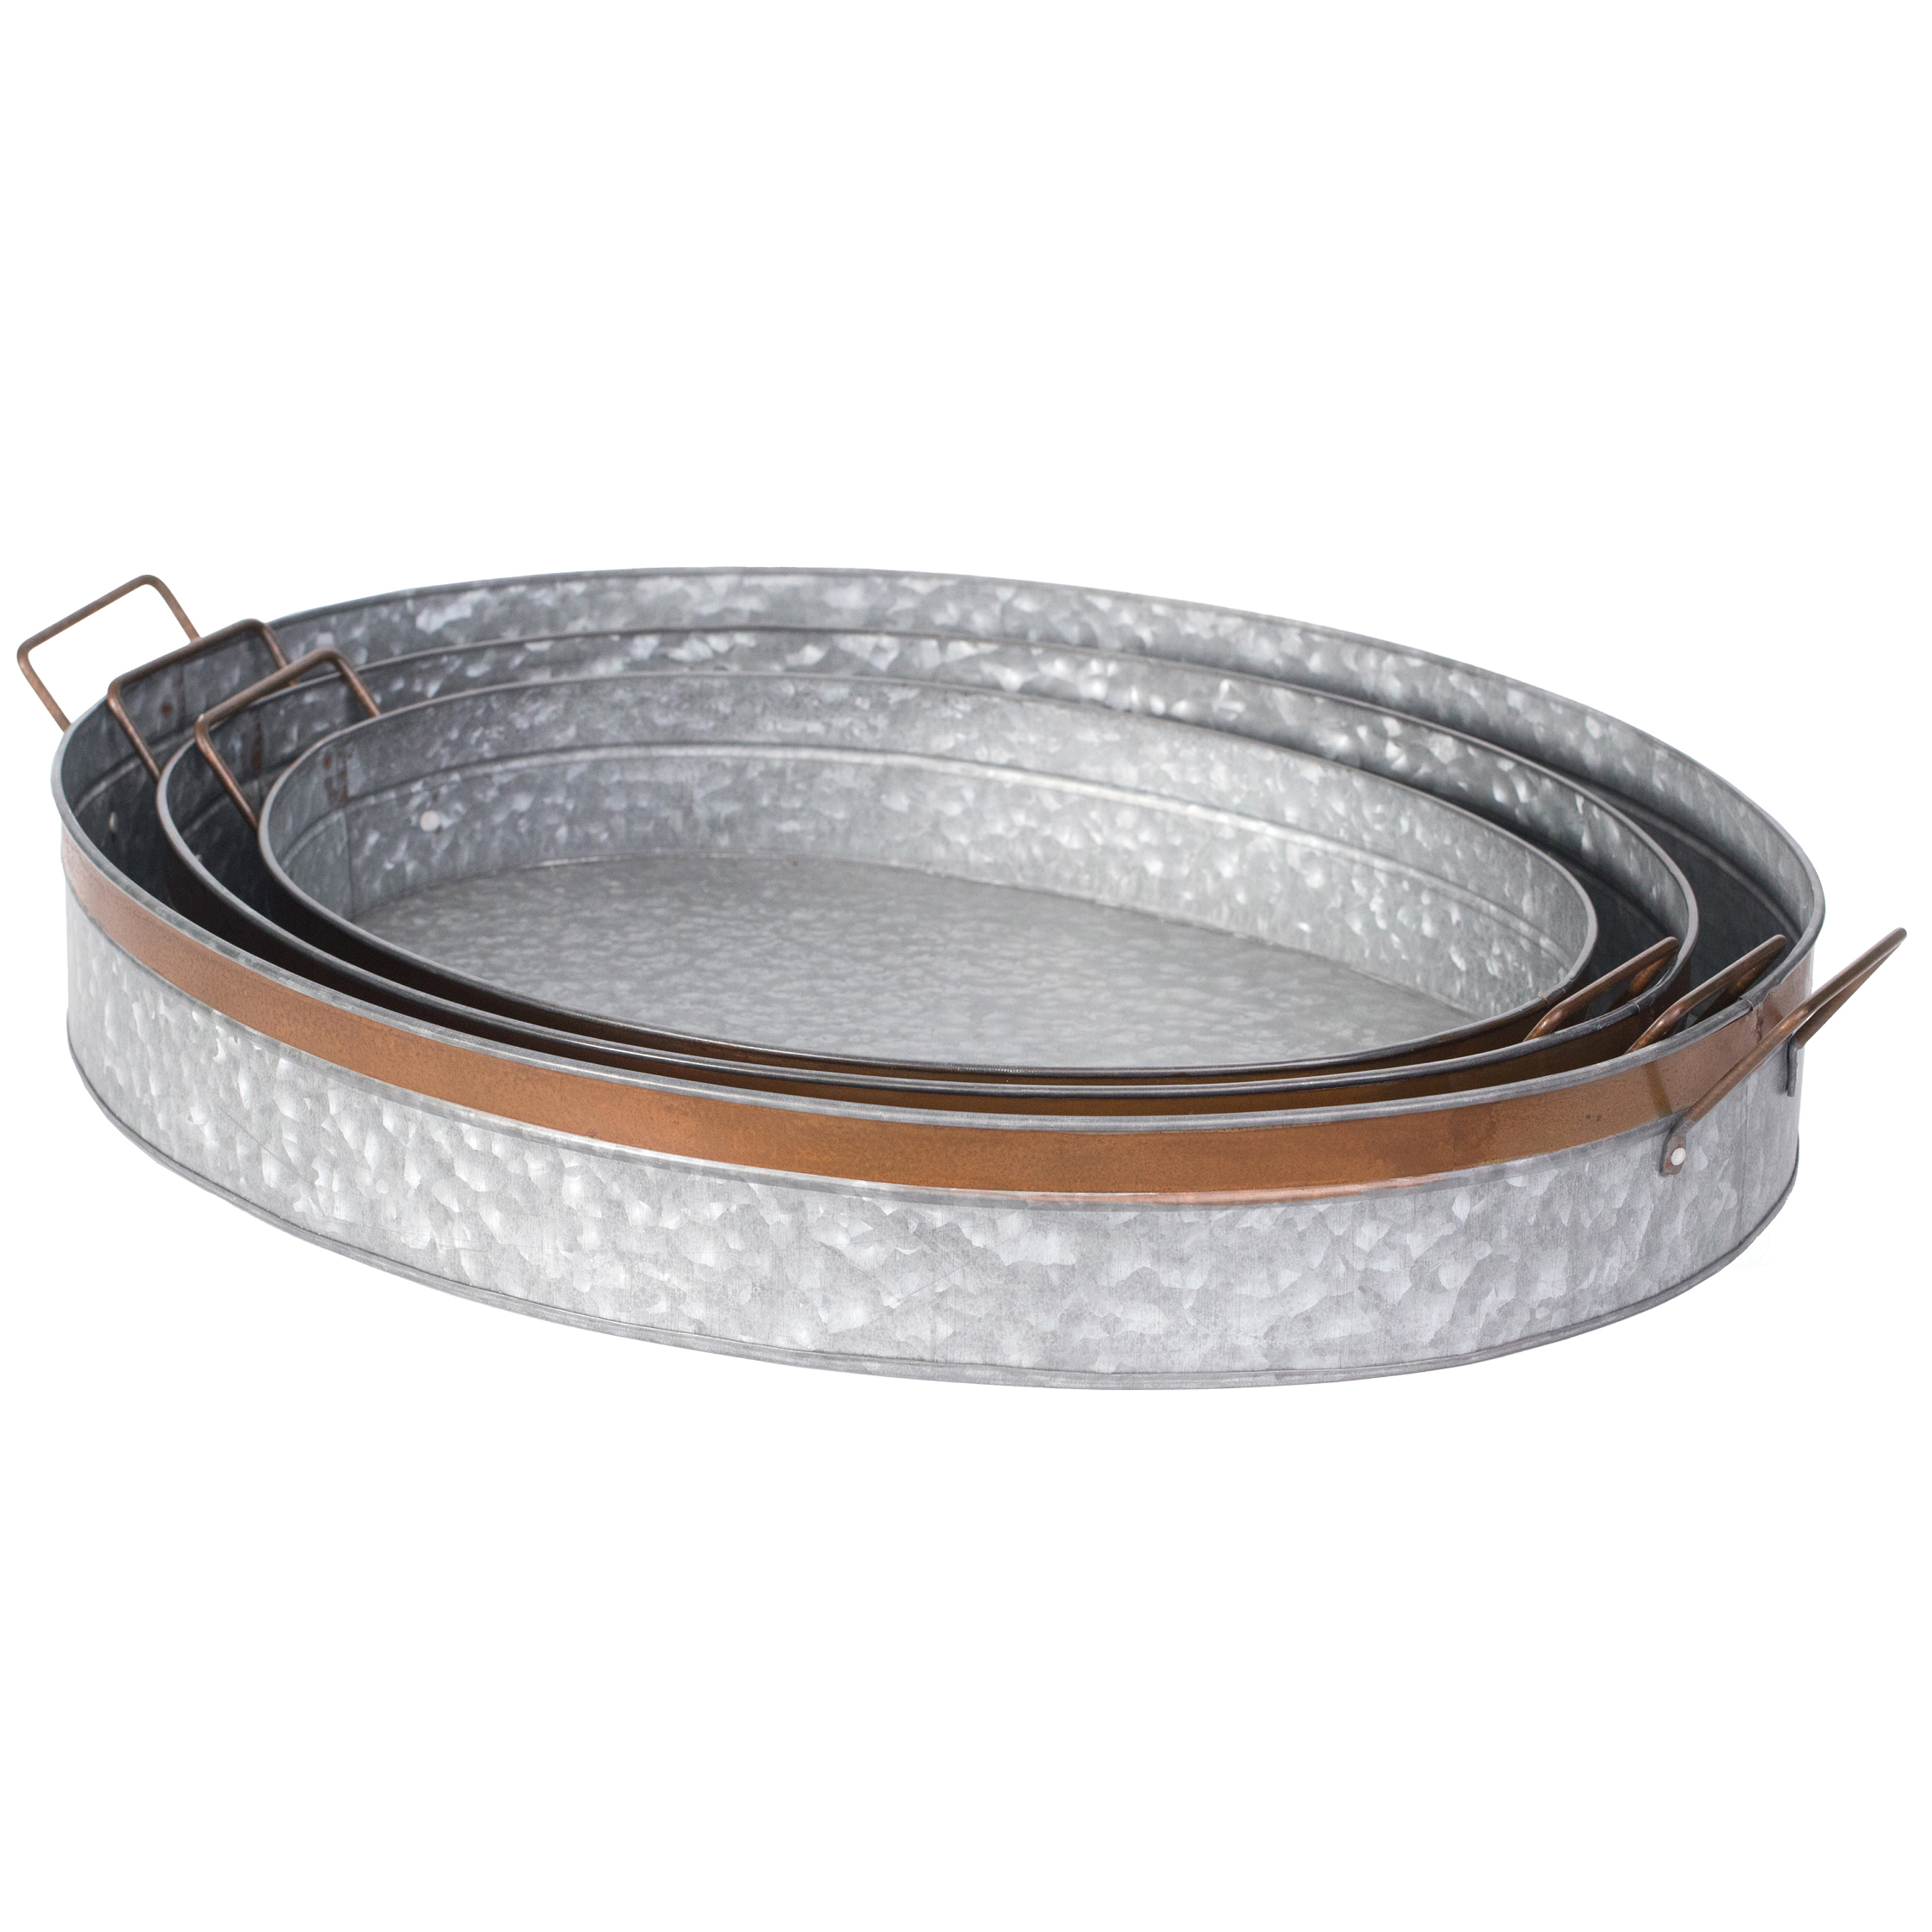 Galvanized Metal Oval Rustic Serving Tray With Handles - Large